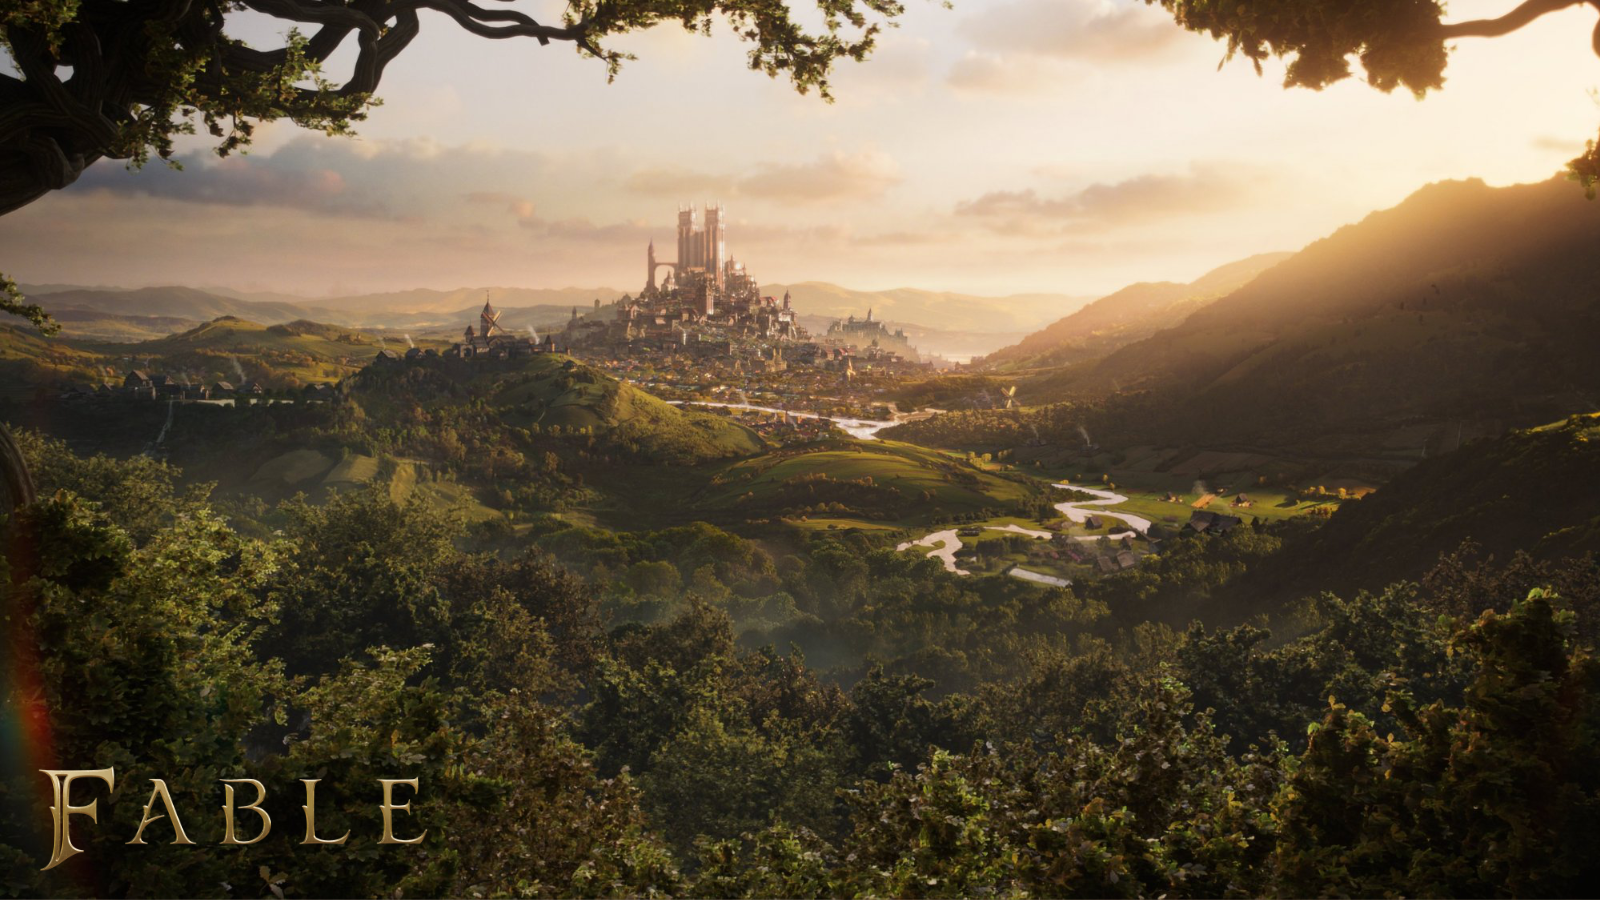 Marketing image for Fable depicting a fantasy world.